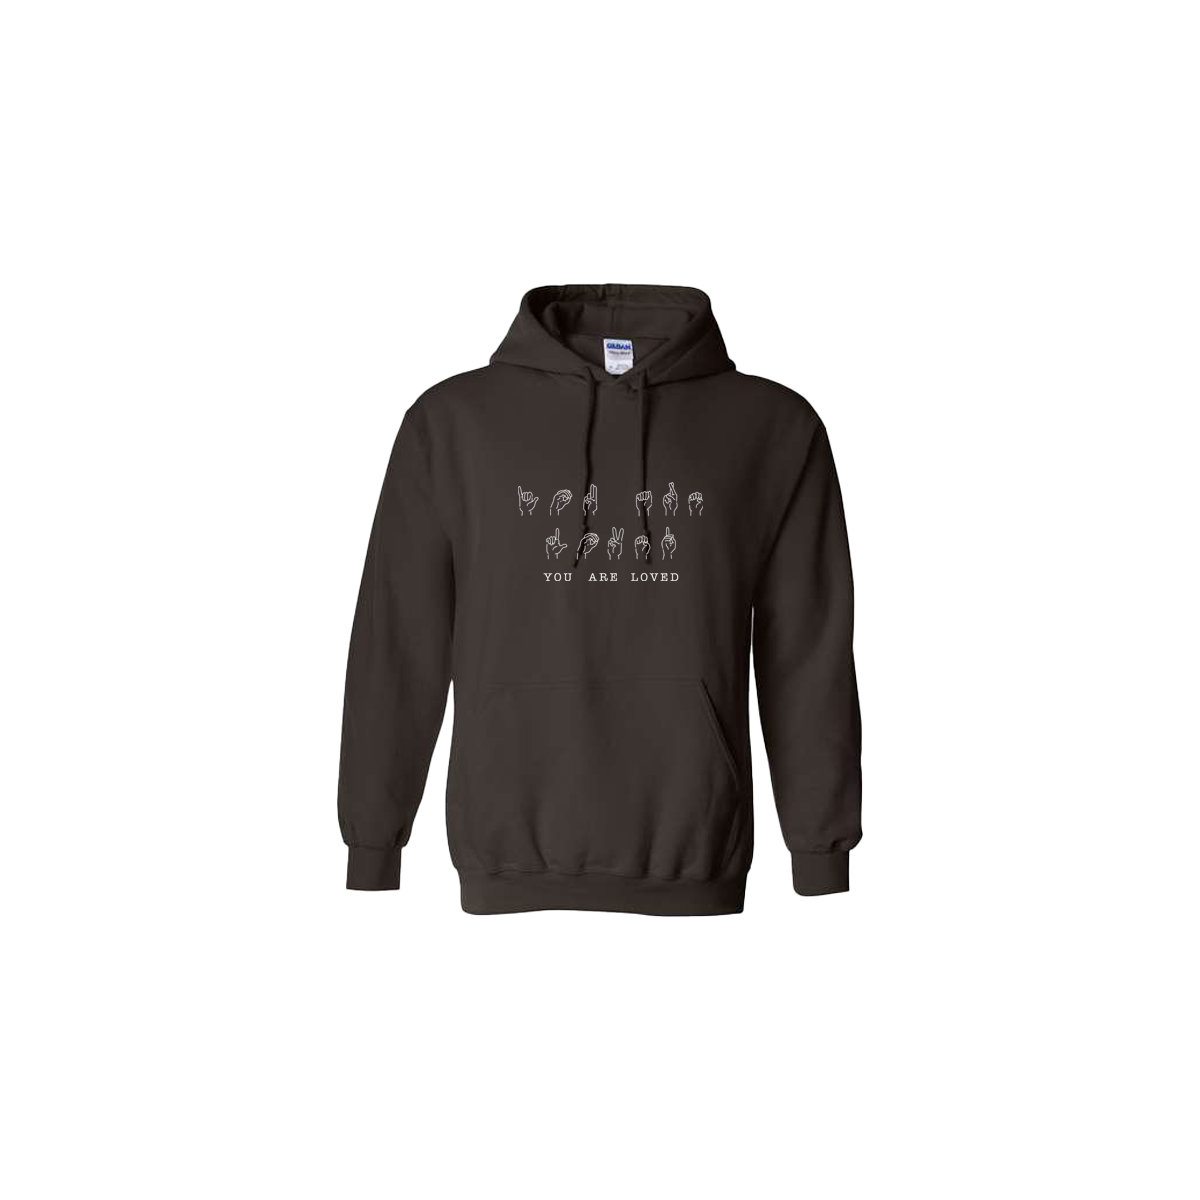 You Are Loved Sign Language Embroidered Brown Hoodie - Mental Health Awareness Clothing